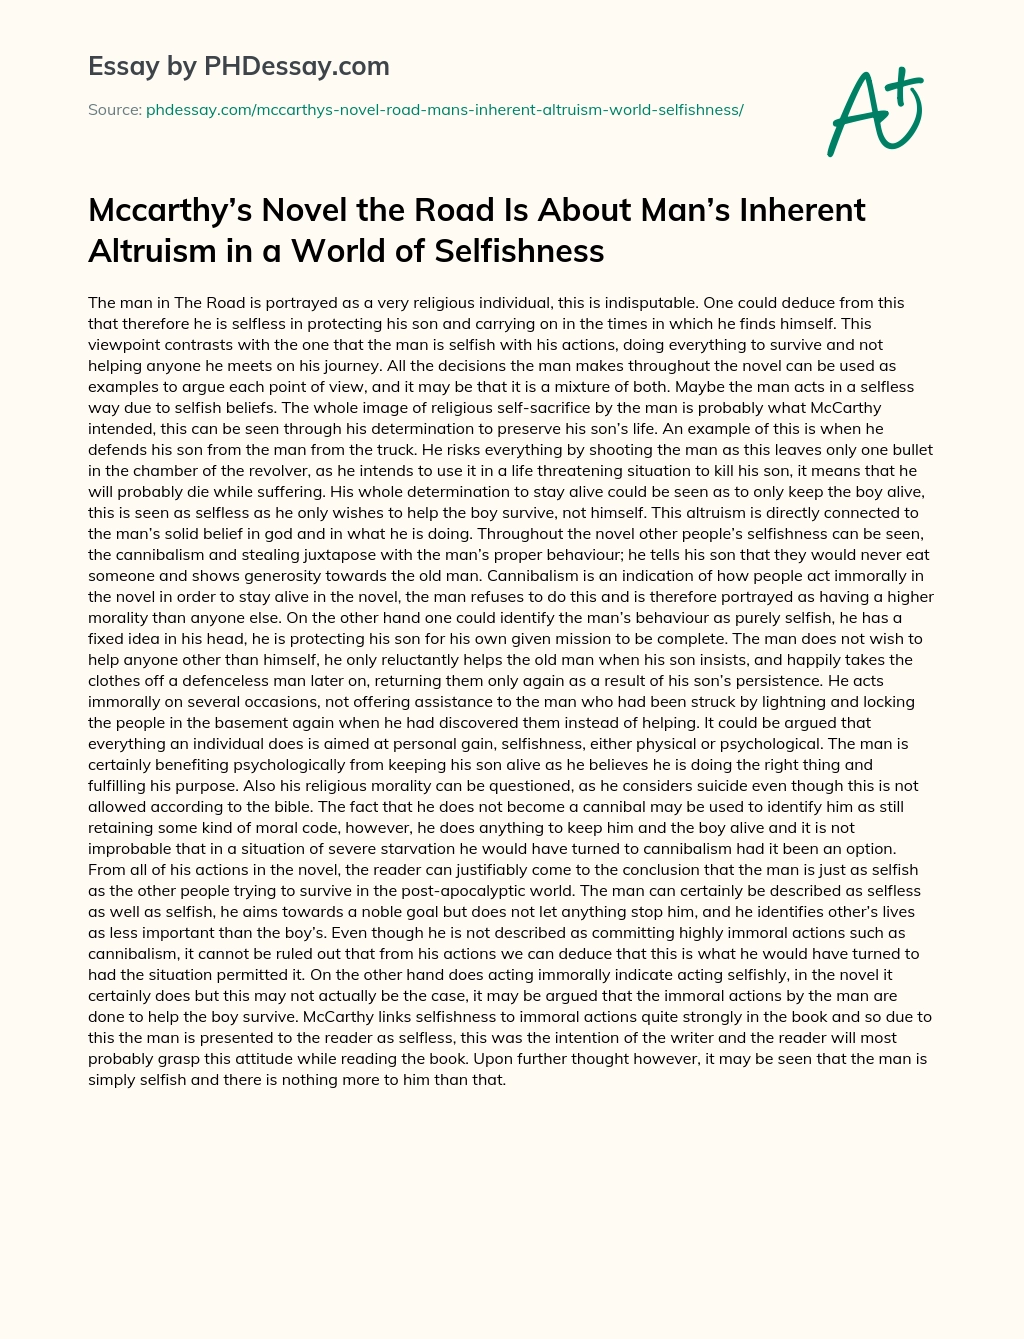 Mccarthy’s Novel the Road Is About Man’s Inherent Altruism in a World of Selfishness essay